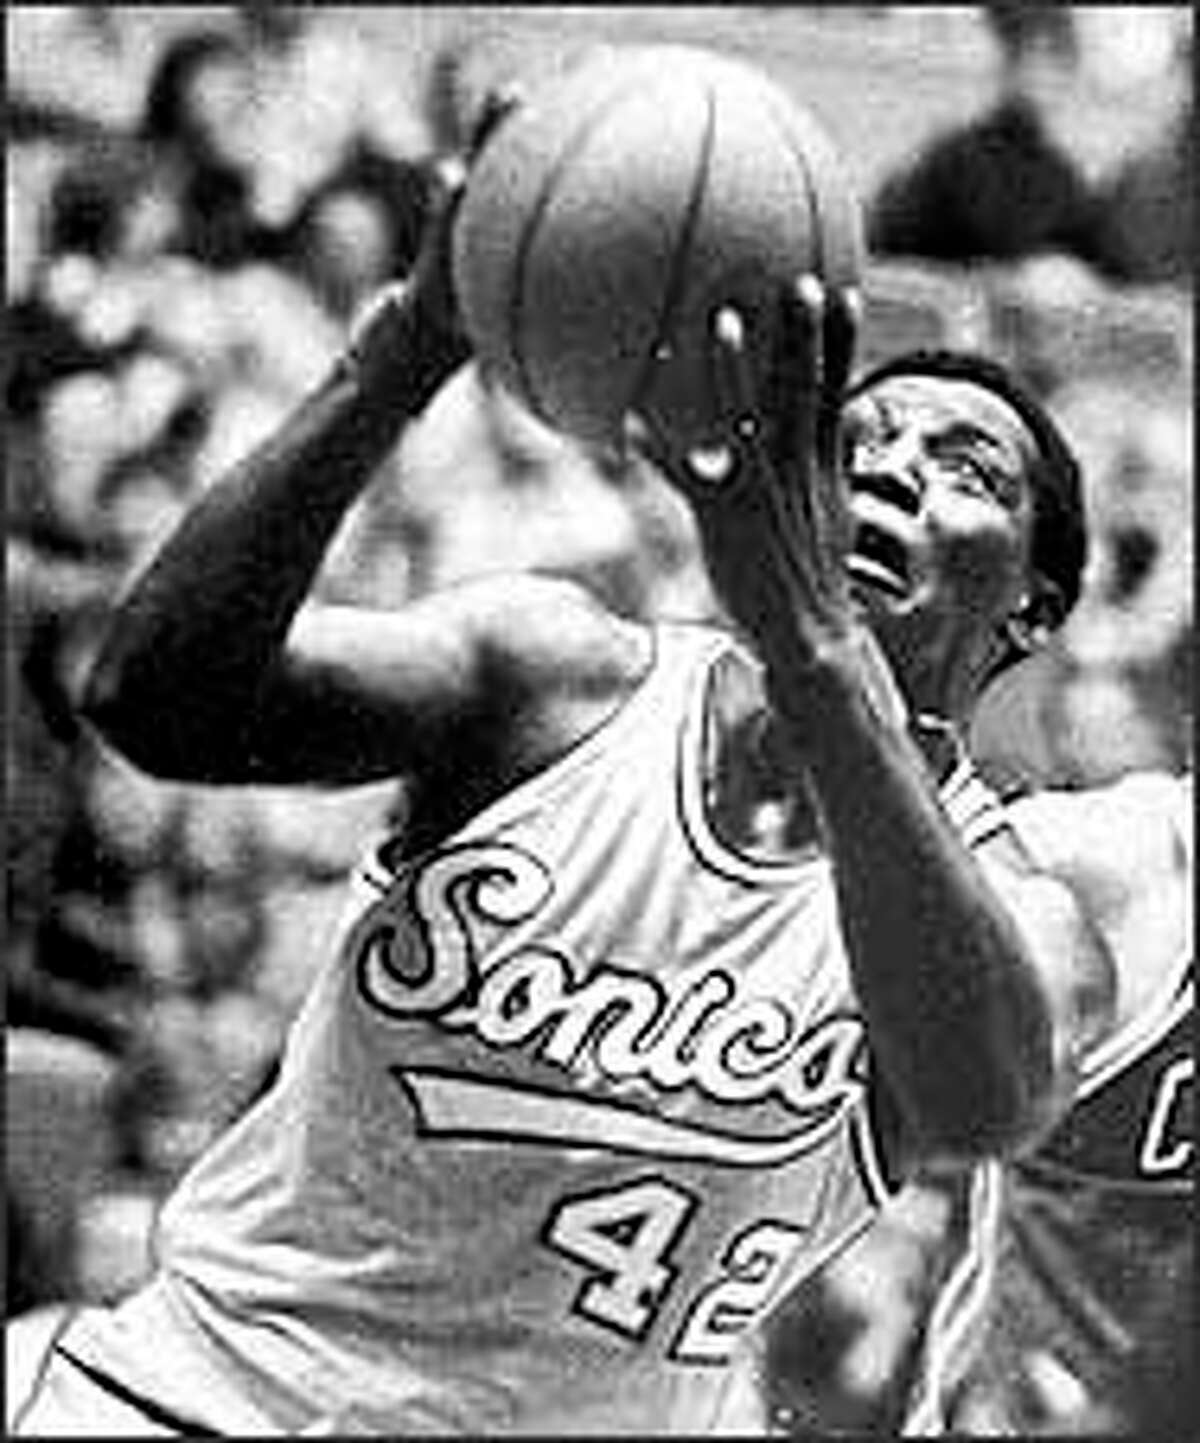 After leaving the SuperSonics, John Brisker left for Uganda, and was never seen or heard from again. The mystery is legendary.